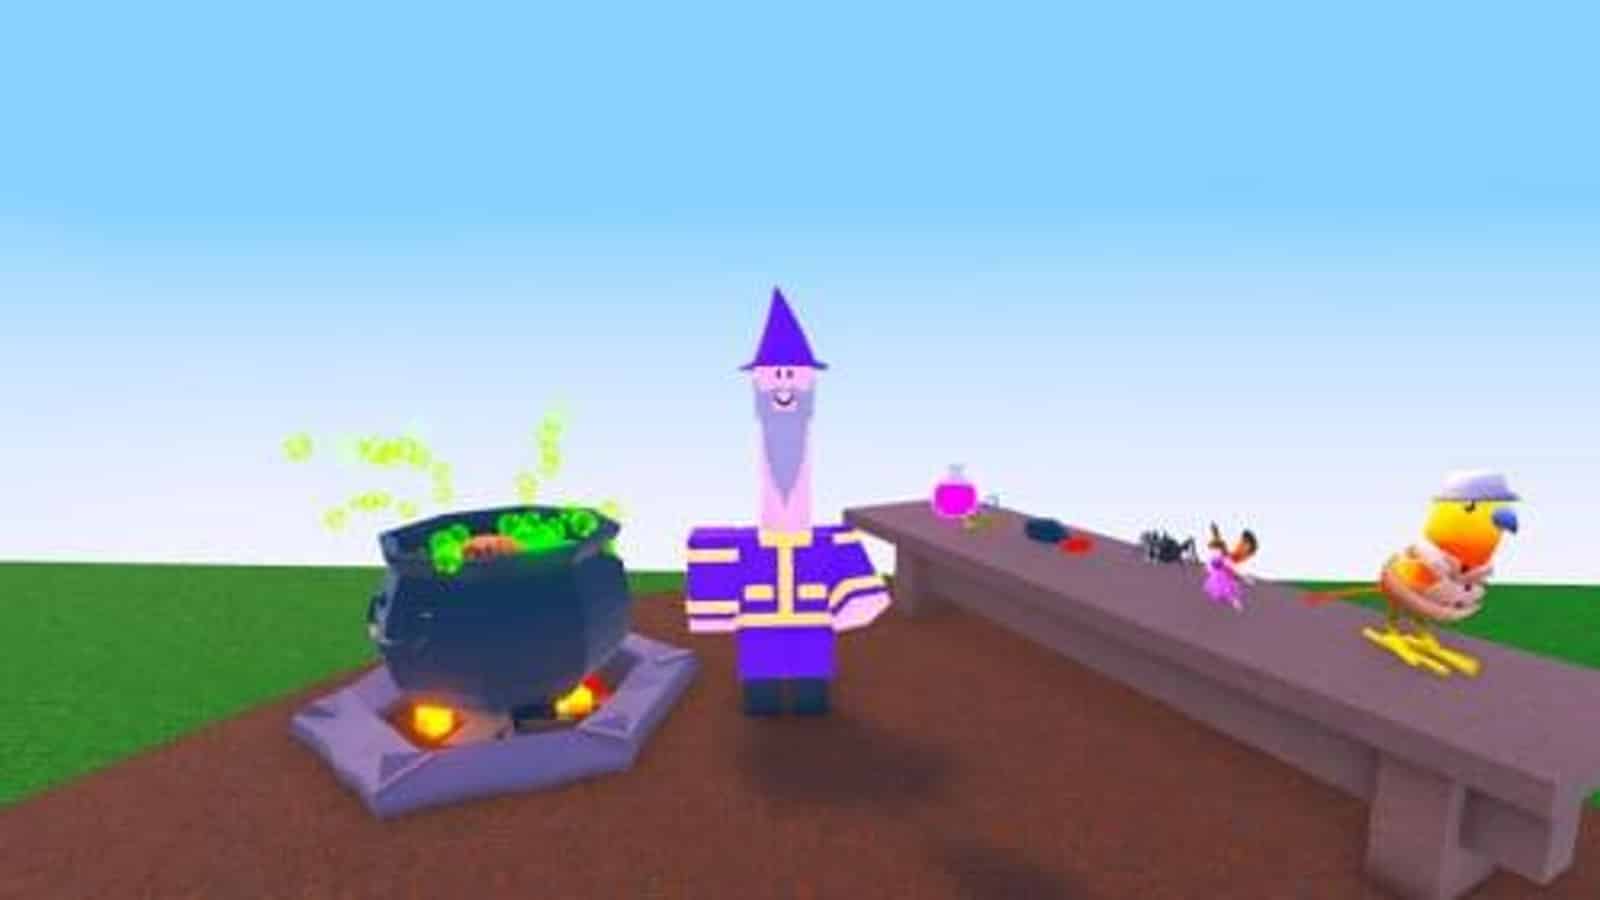 roblox guest witch Minecraft Mob Skin